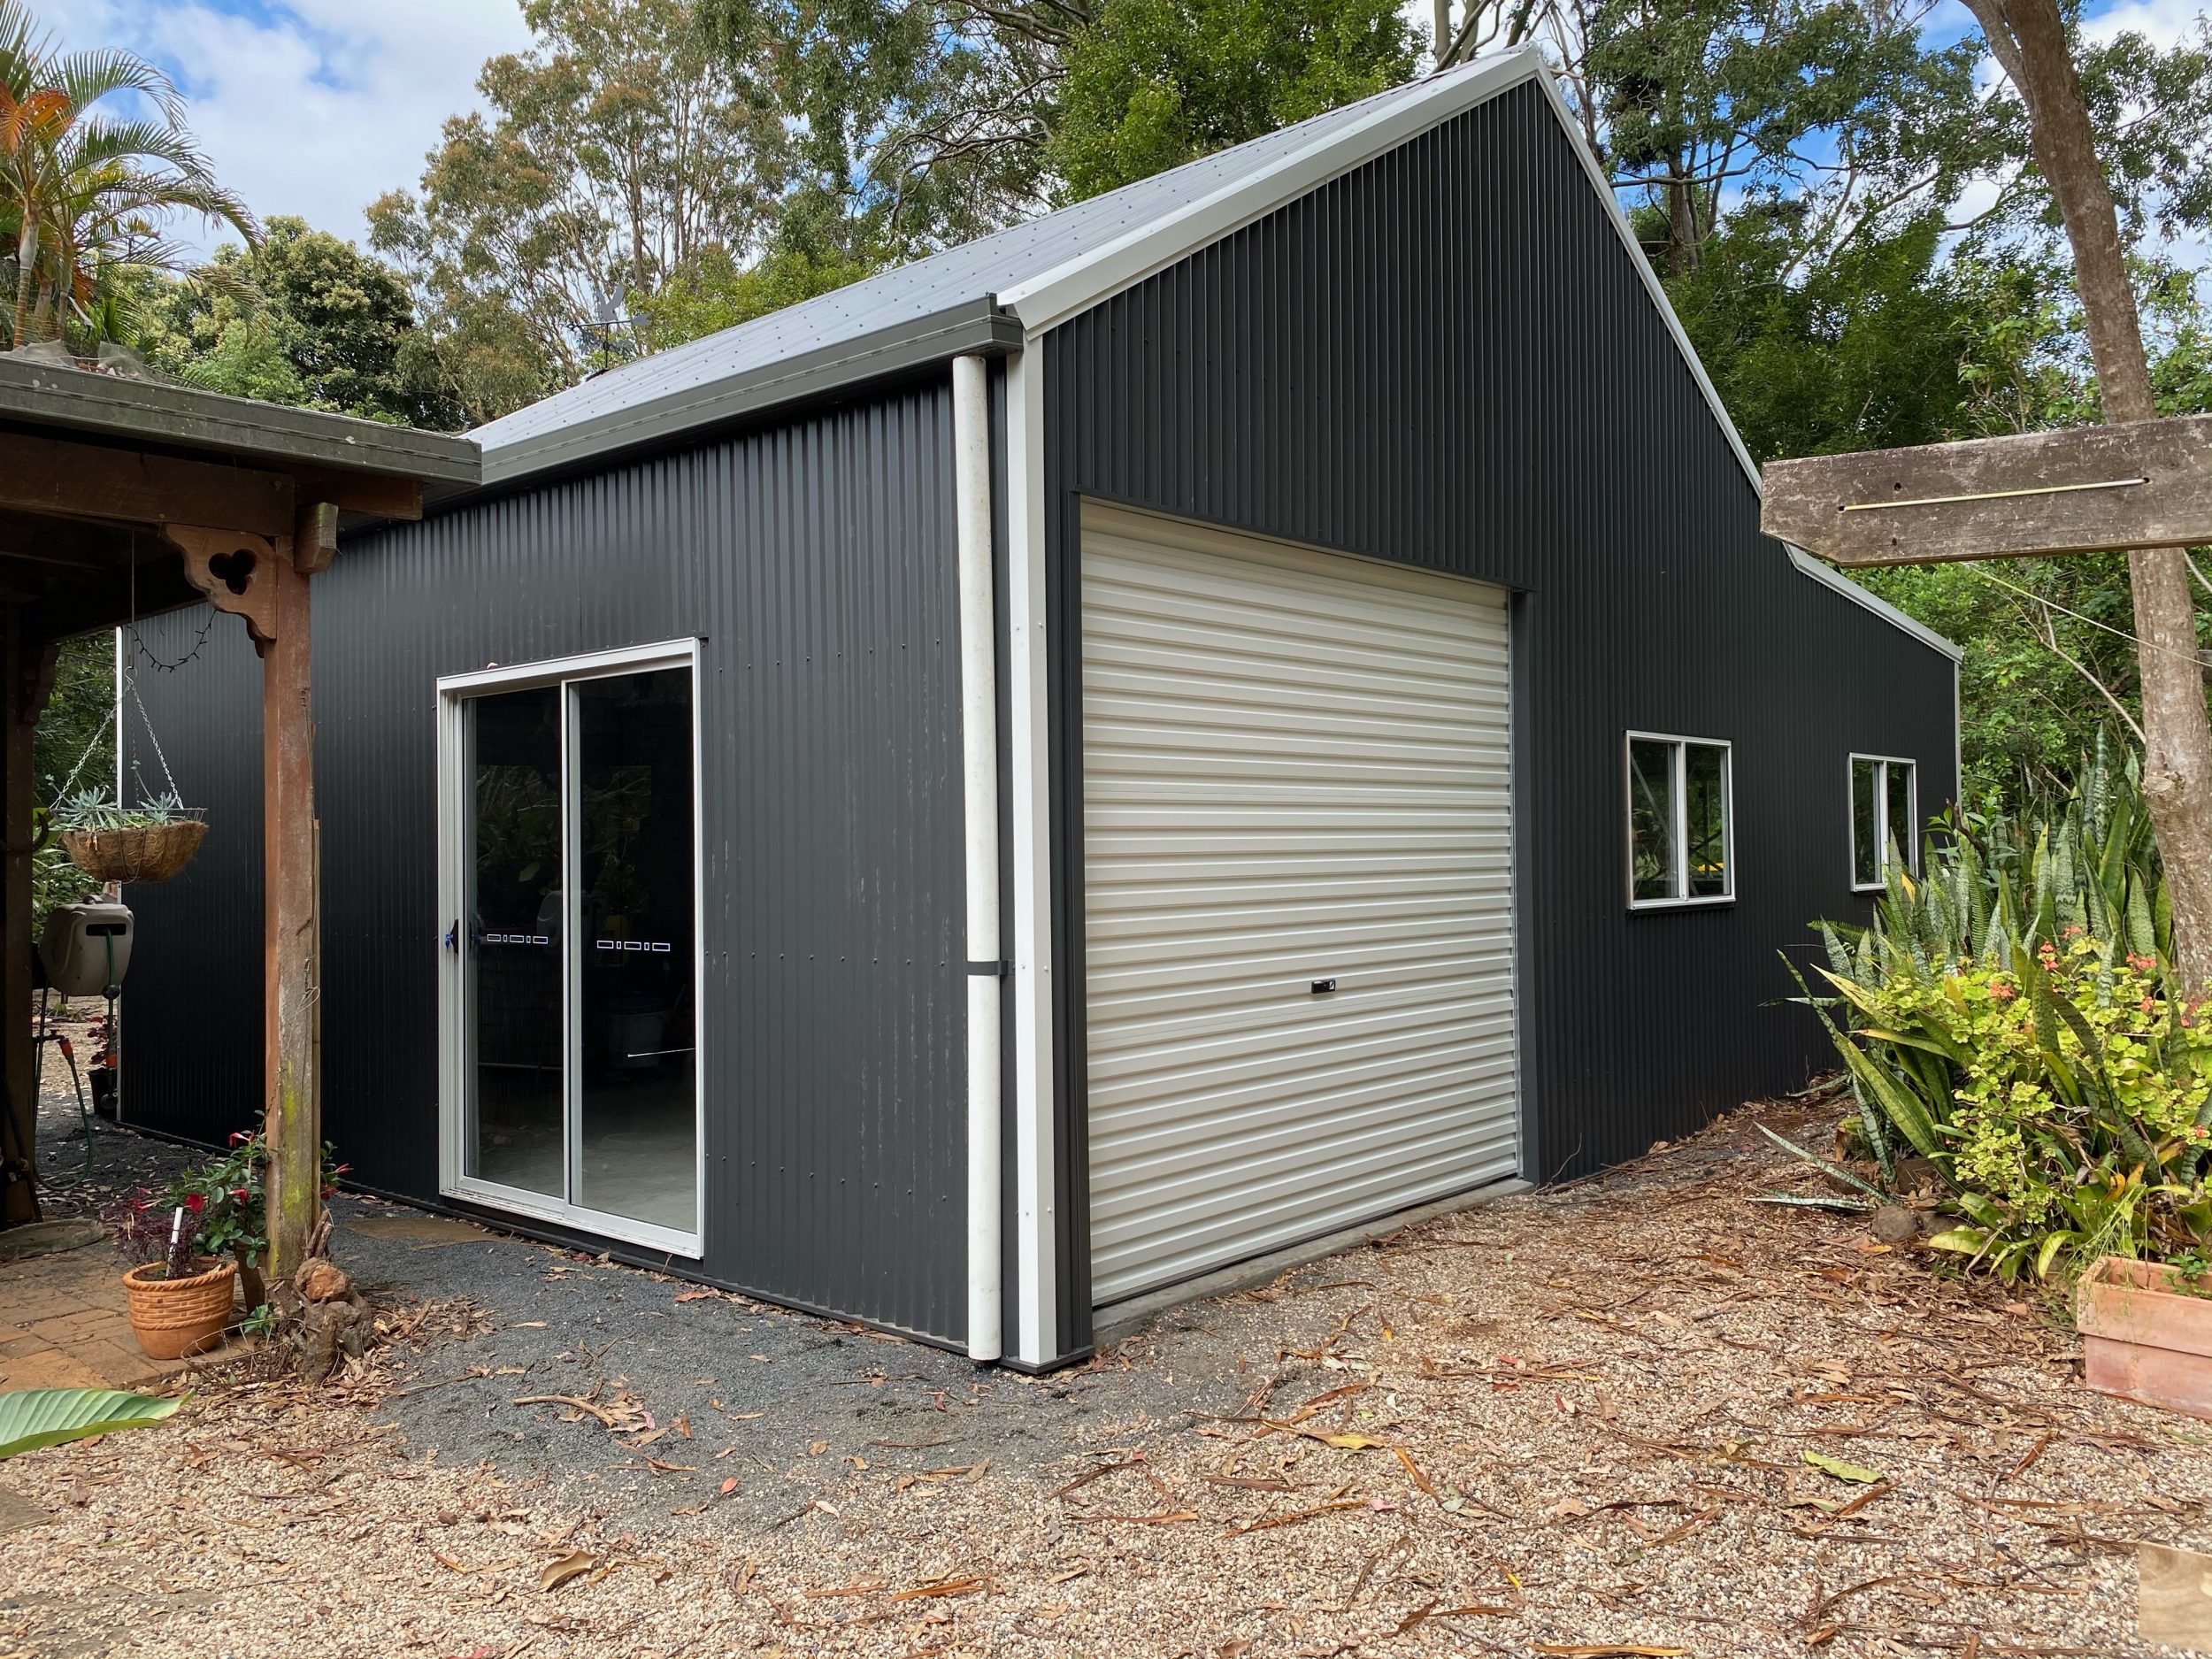 How to Build a Granny Flat Rental Unit On Your Property